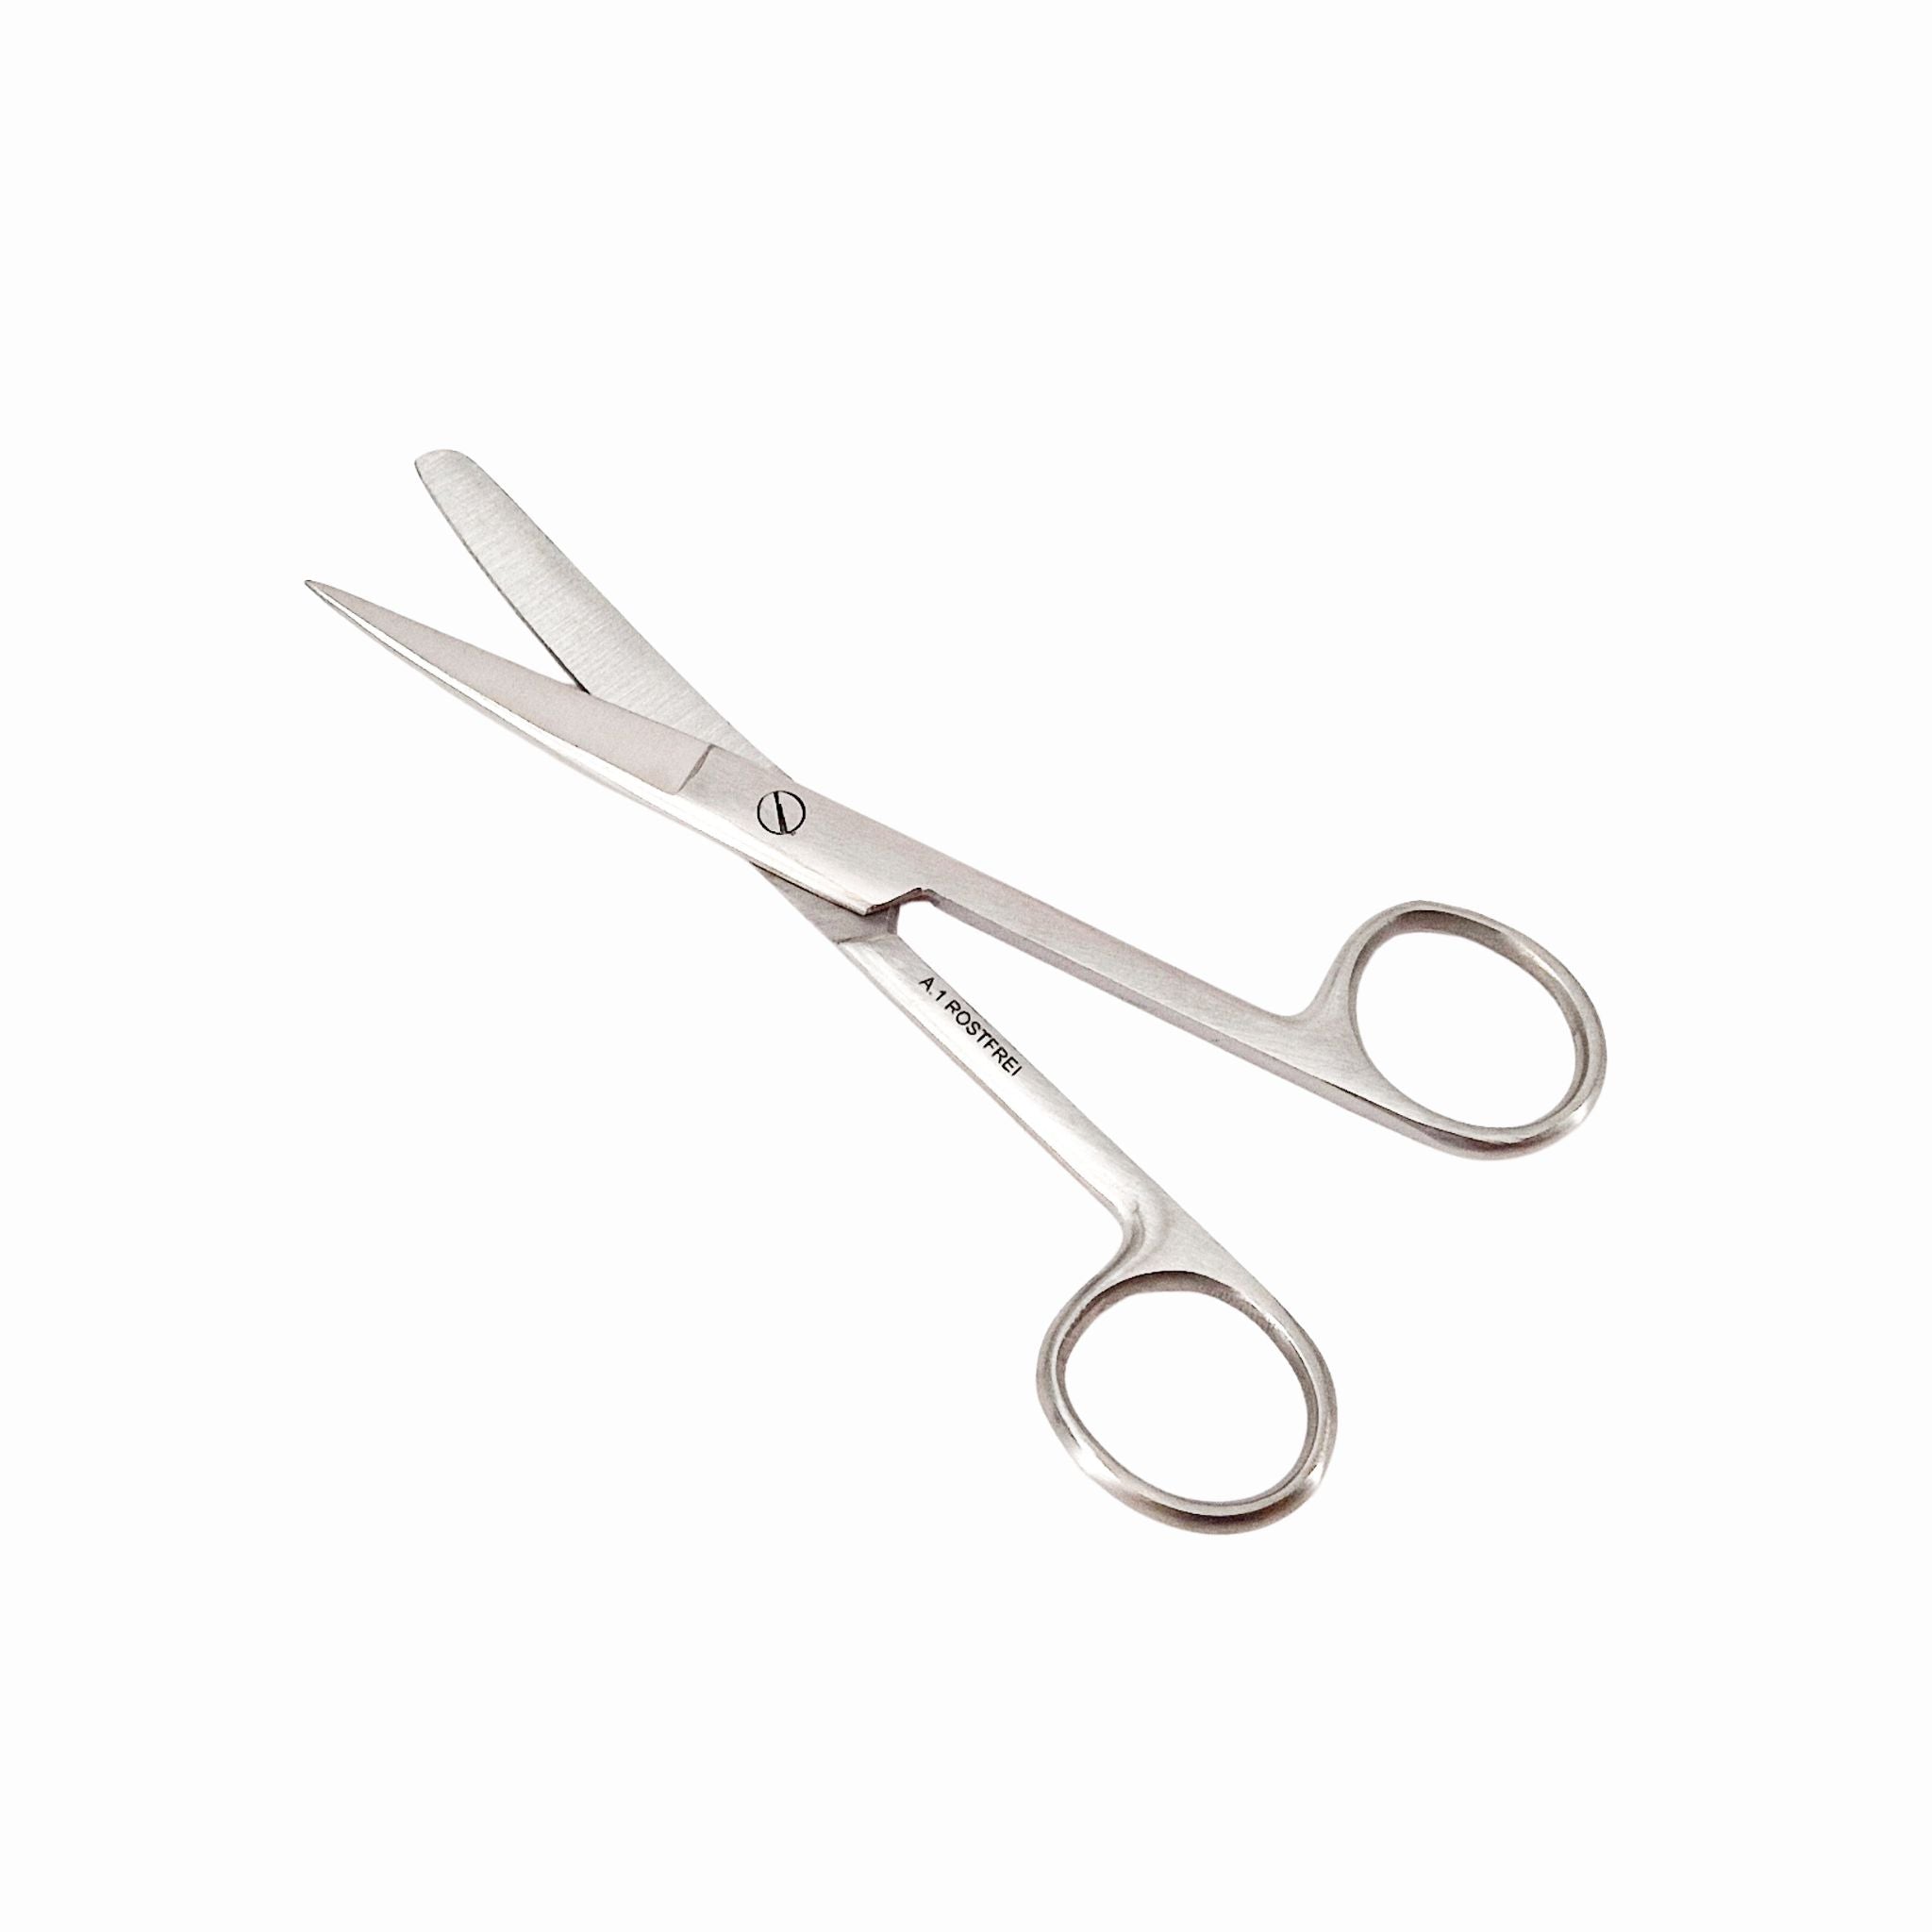 Lavabis scissors curved stainless steel - 0